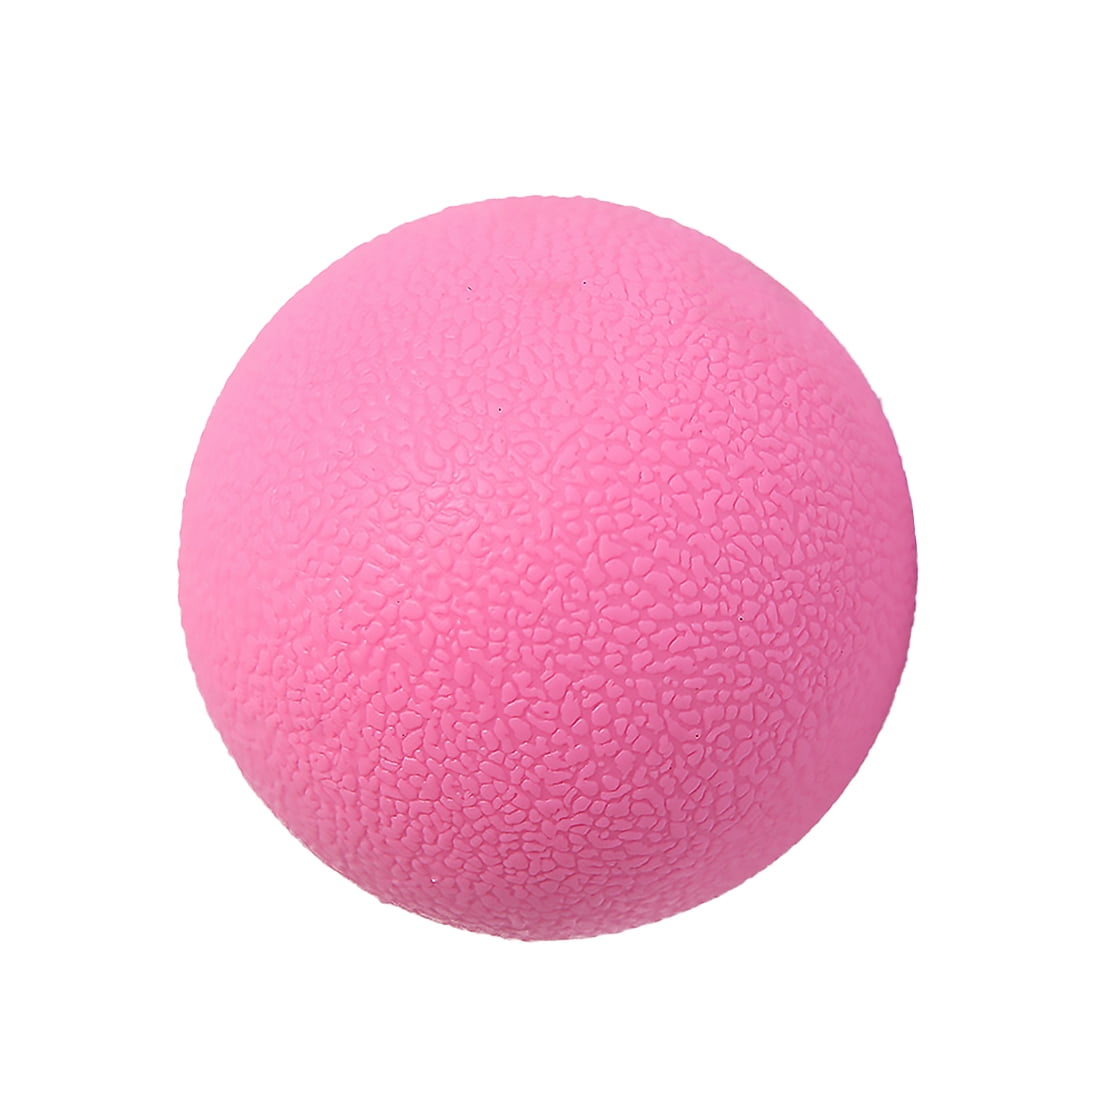 Lacrosse Ball Mobility Myofascial Trigger Point Release Body*Massage YL 